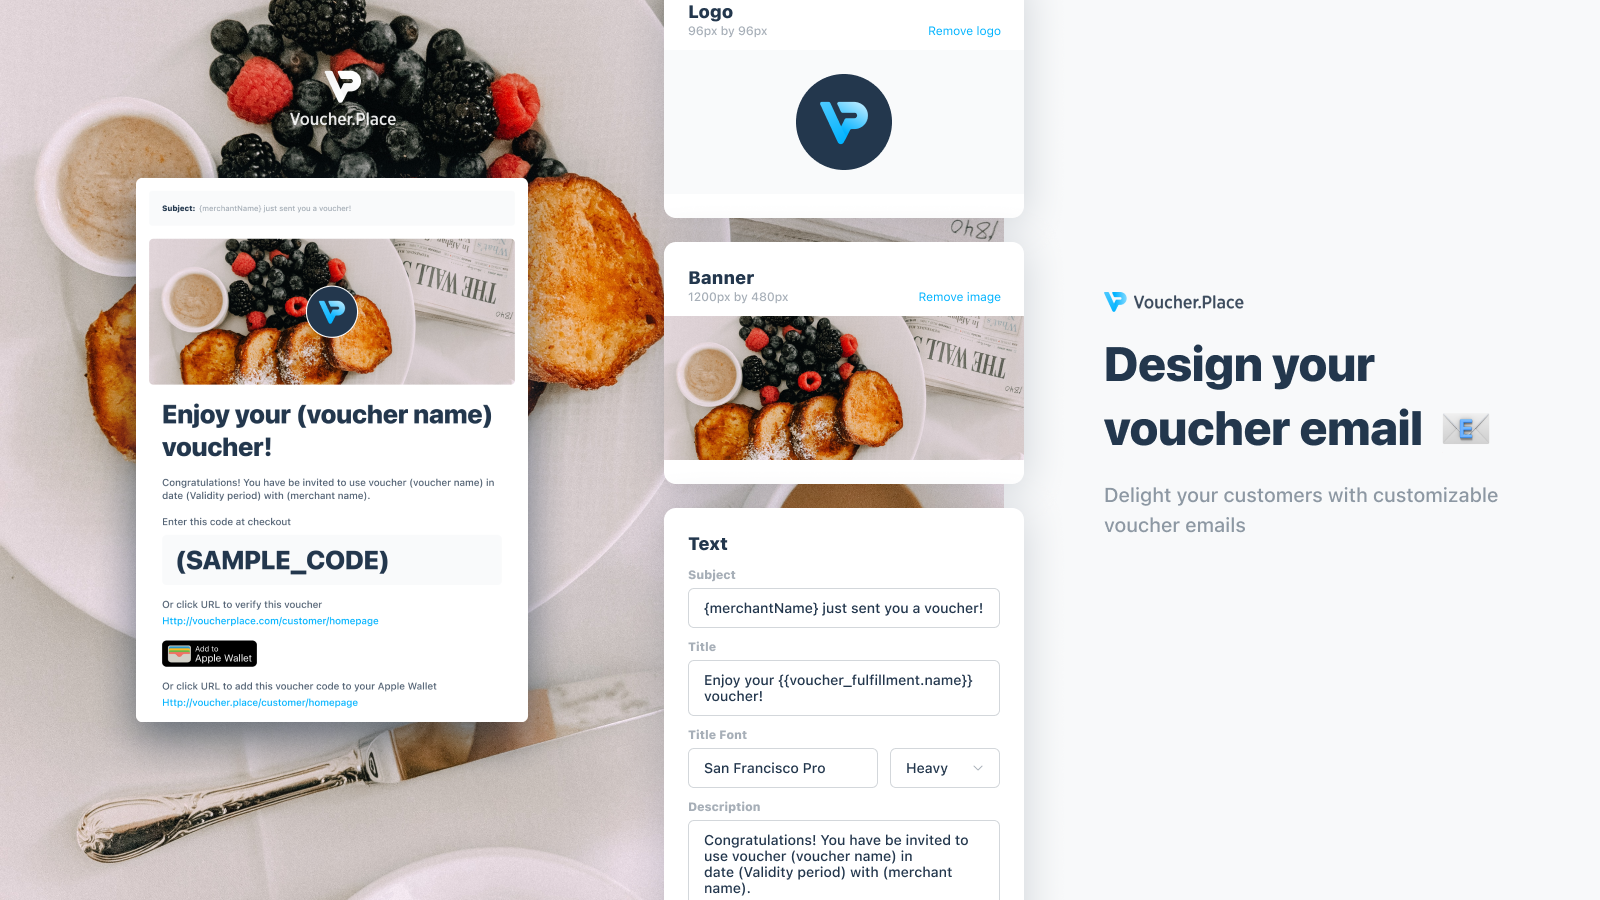 Delight your customers with customizable voucher emails